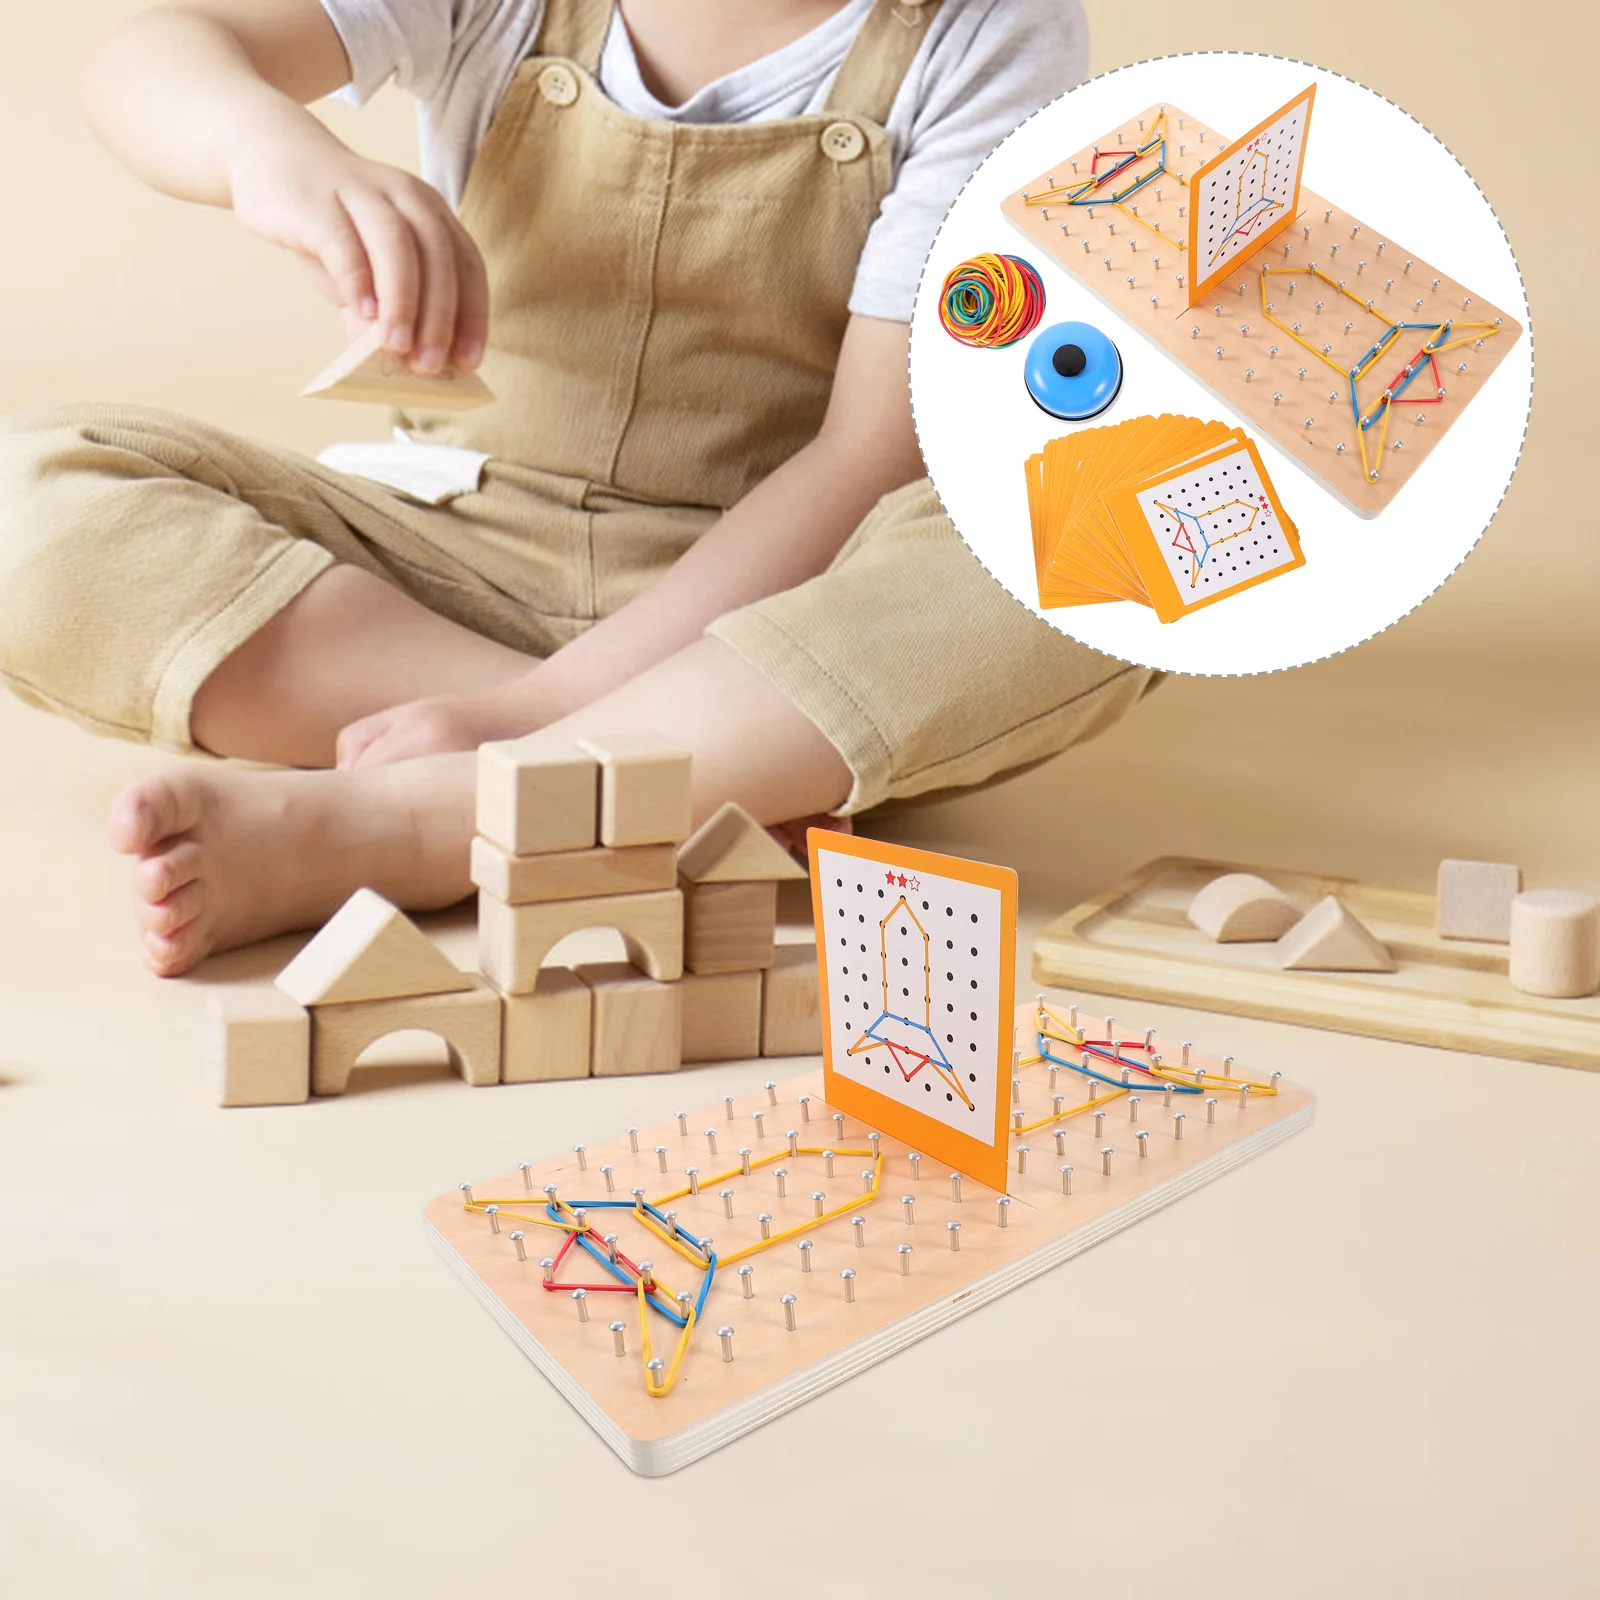 

Educational Toy Kids Prop Primary Mathematics Nail Plate Plaything Geoboard Wooden Toddler Gift Tools